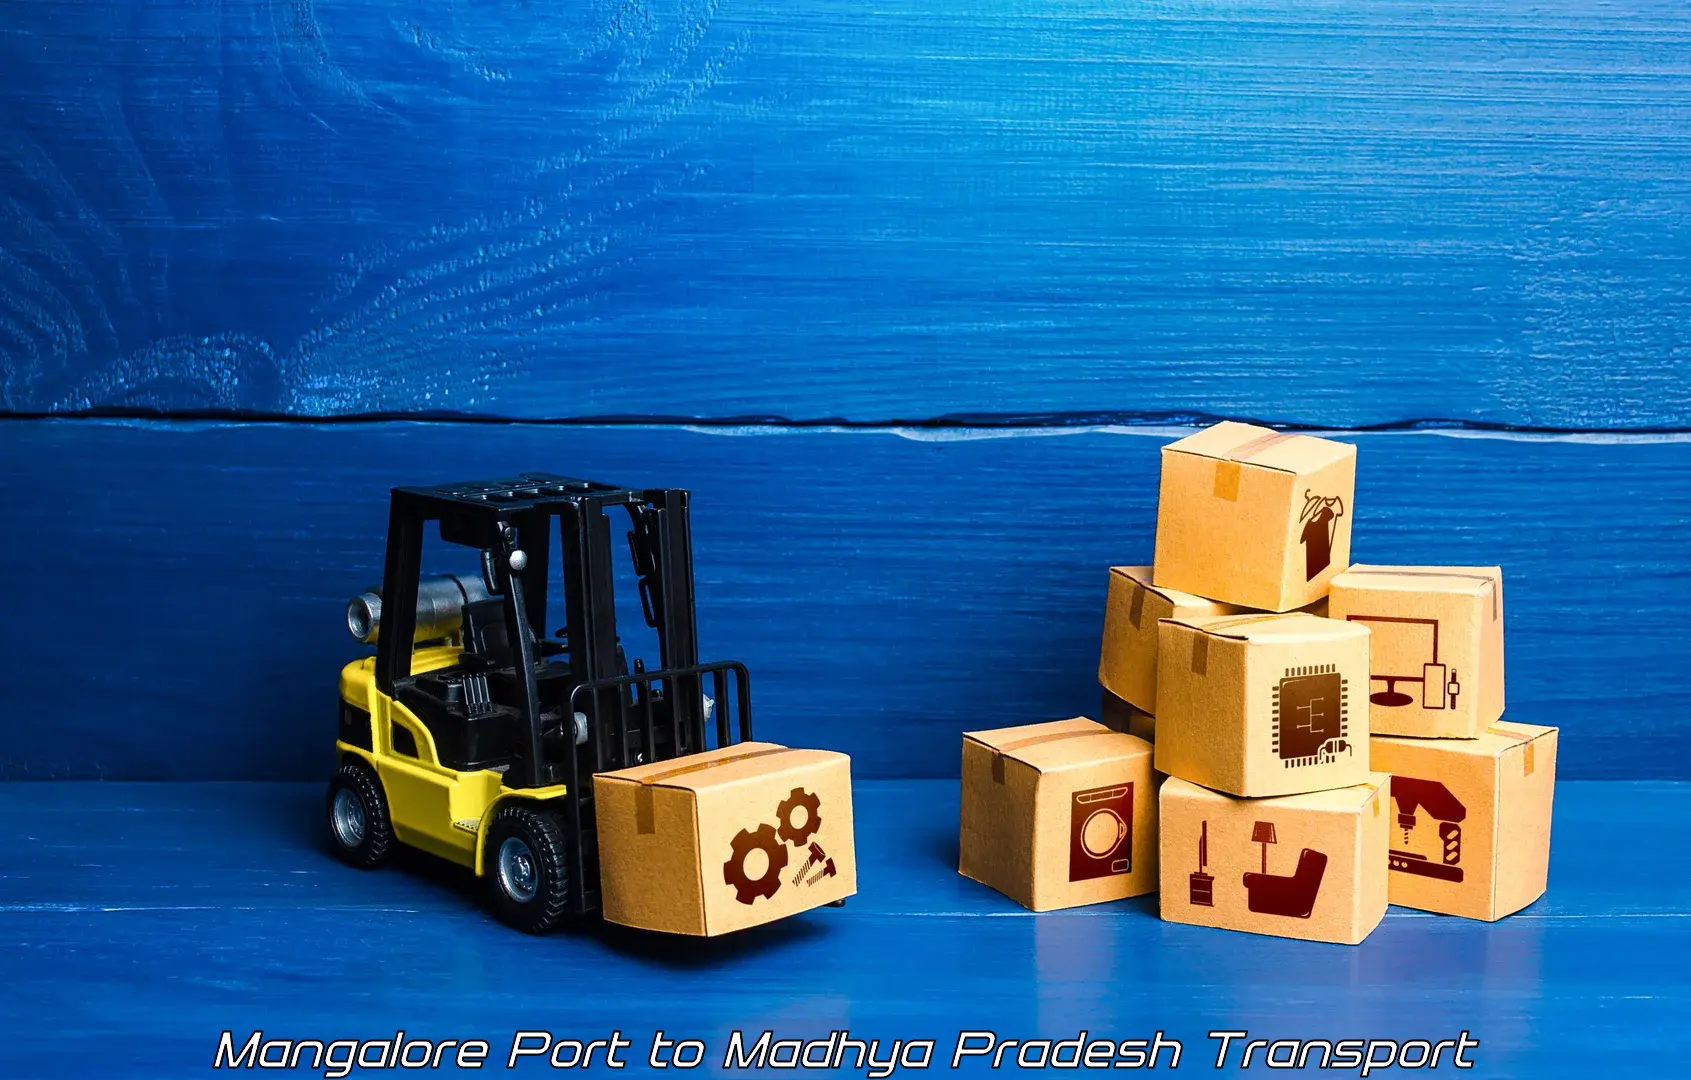 Goods delivery service Mangalore Port to Raipur Karchuliyan